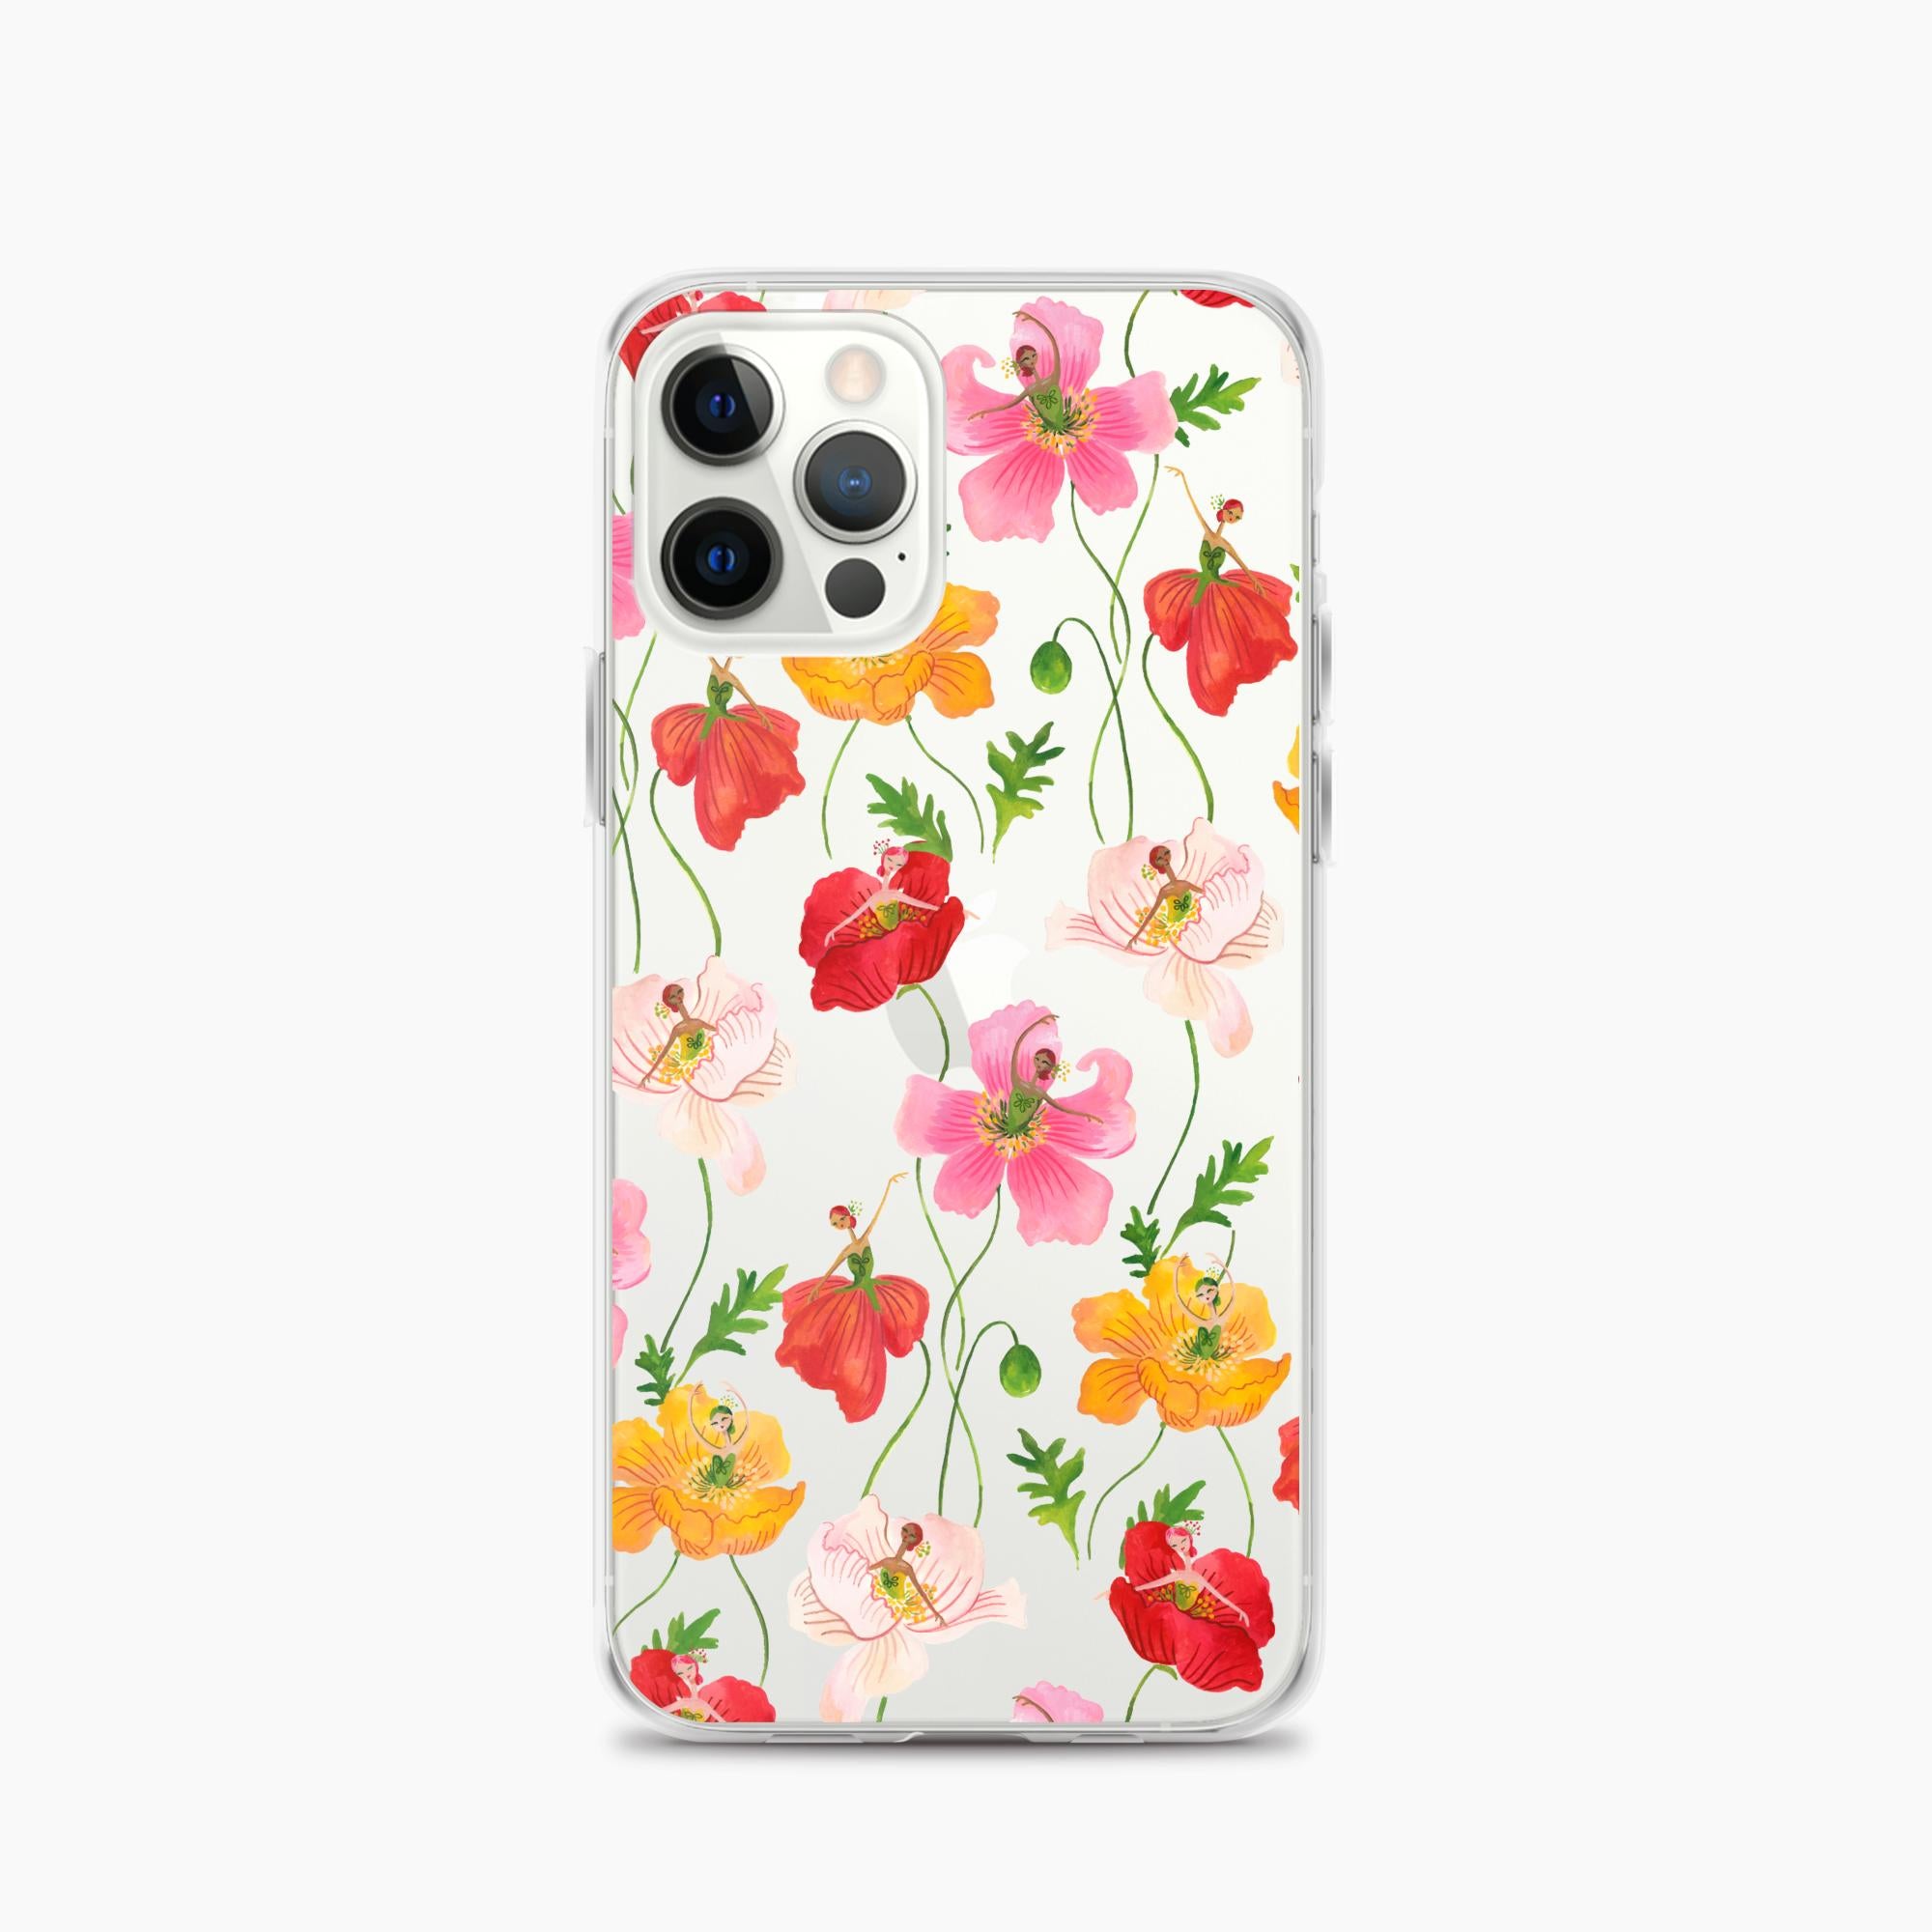 Waltz of the Poppies iPhone Case